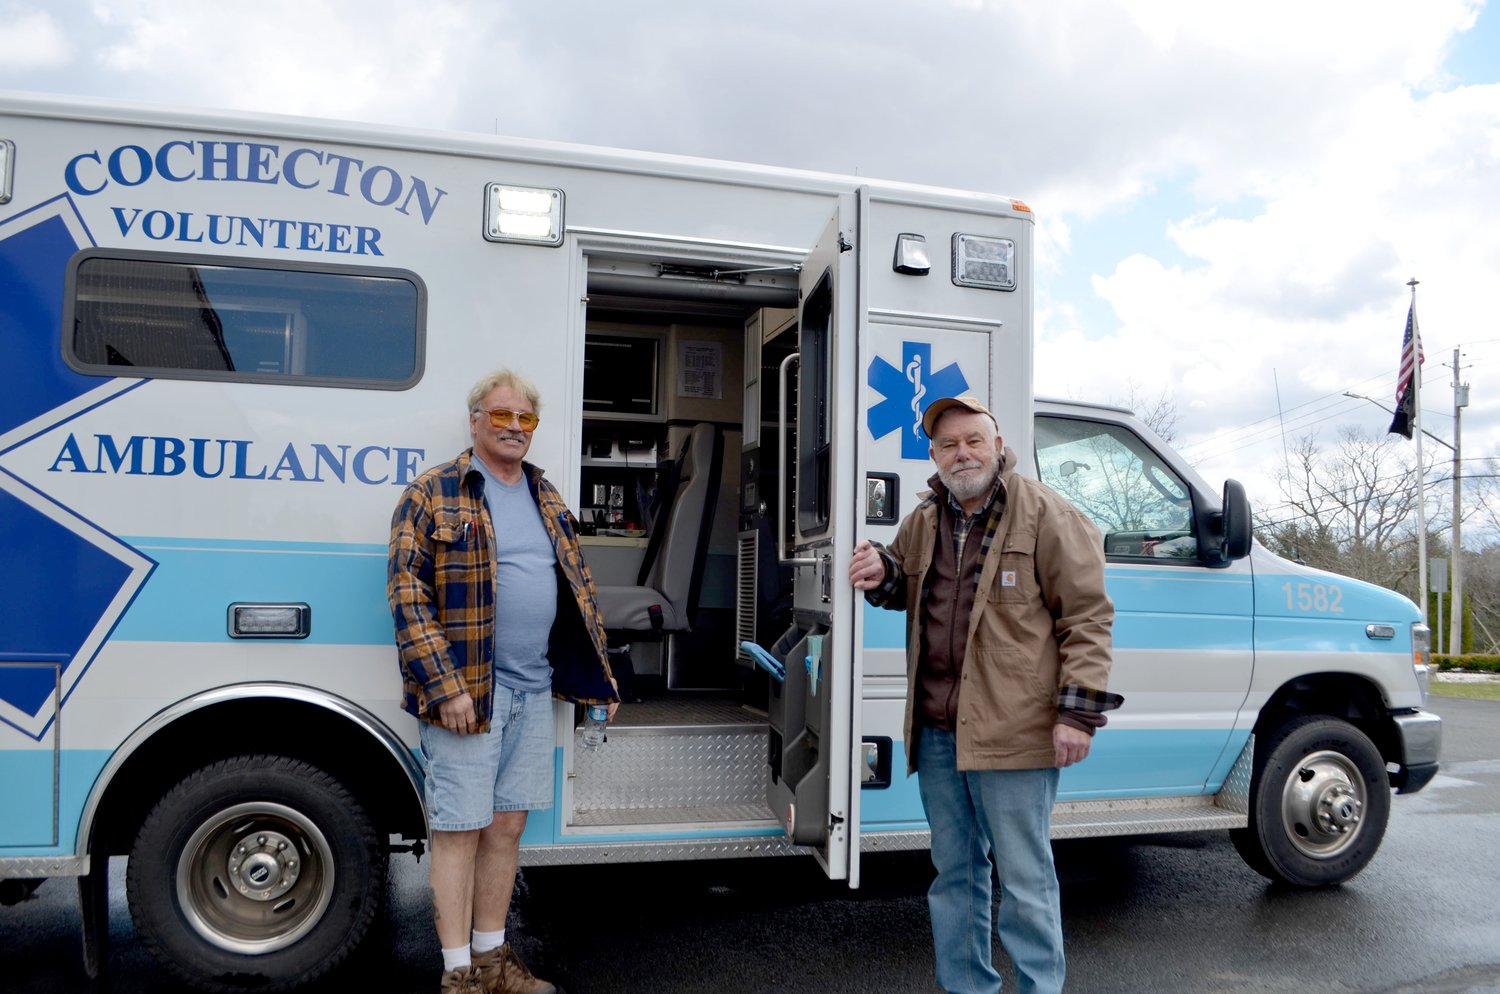 Cochecton Volunteer Ambulance Corps president Mike Attianese and vice-president Peter Grosser, caretaking the newer of the corps' two ambulances.